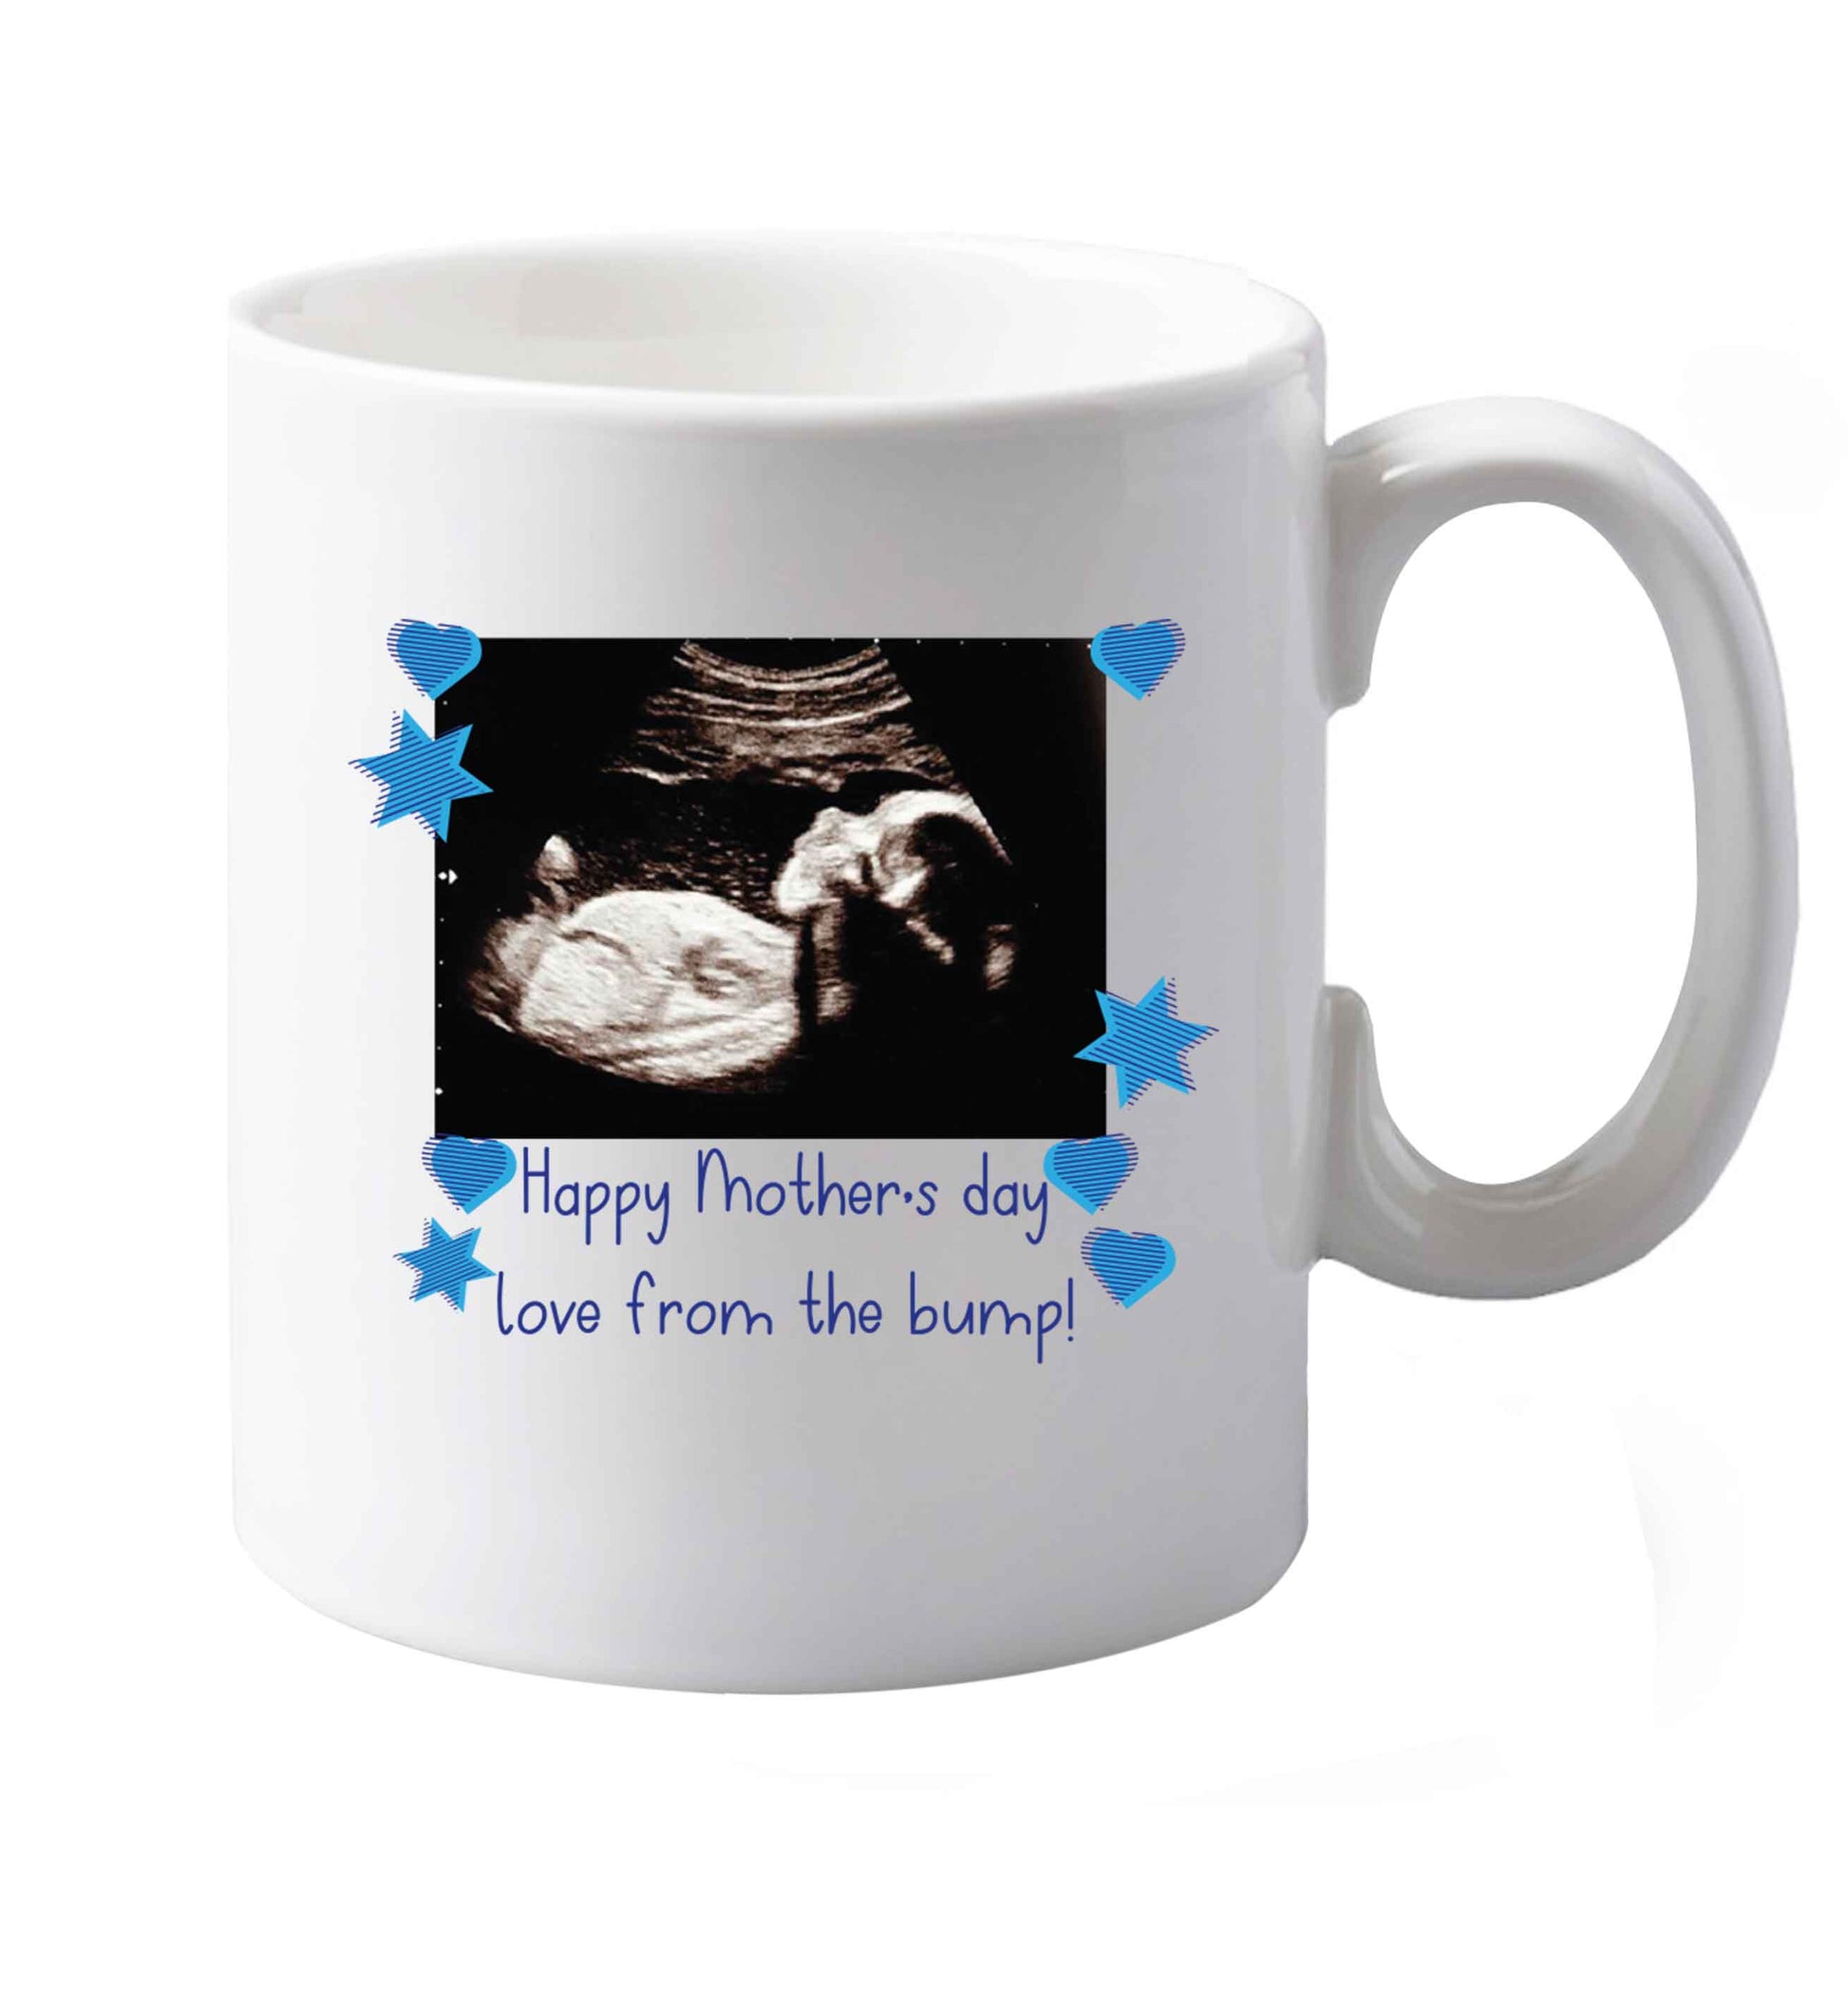 10 oz Happy Mother's day love from the bump - blue ceramic mug both sides